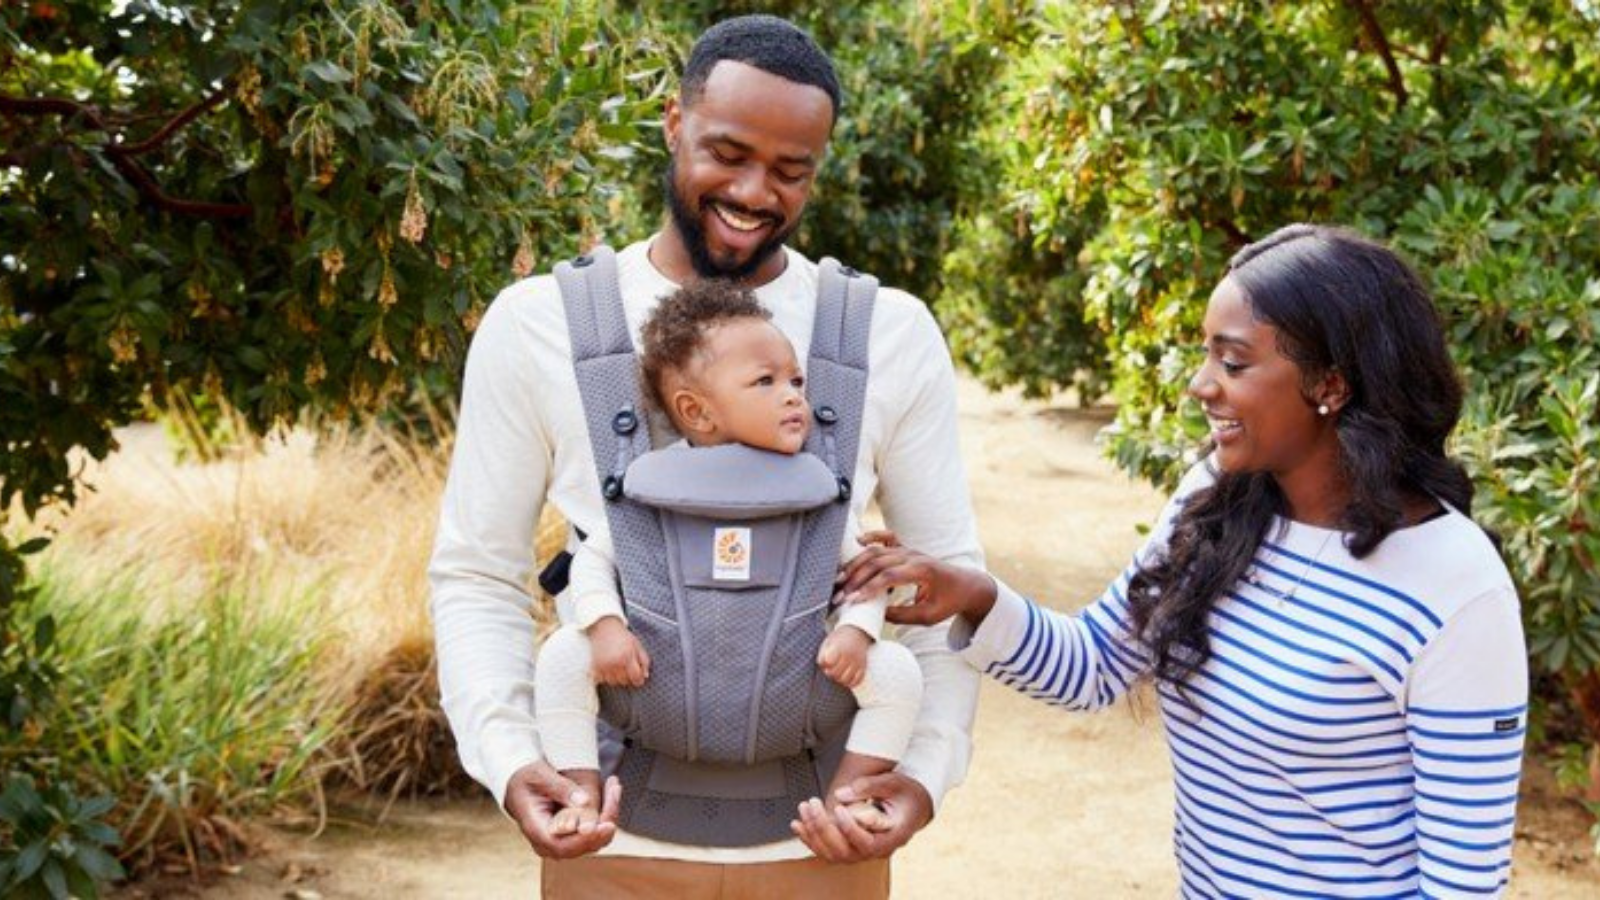 Man carries baby facing forwards in grey Ergobaby Omni Breeze carrier while woman smiles with them